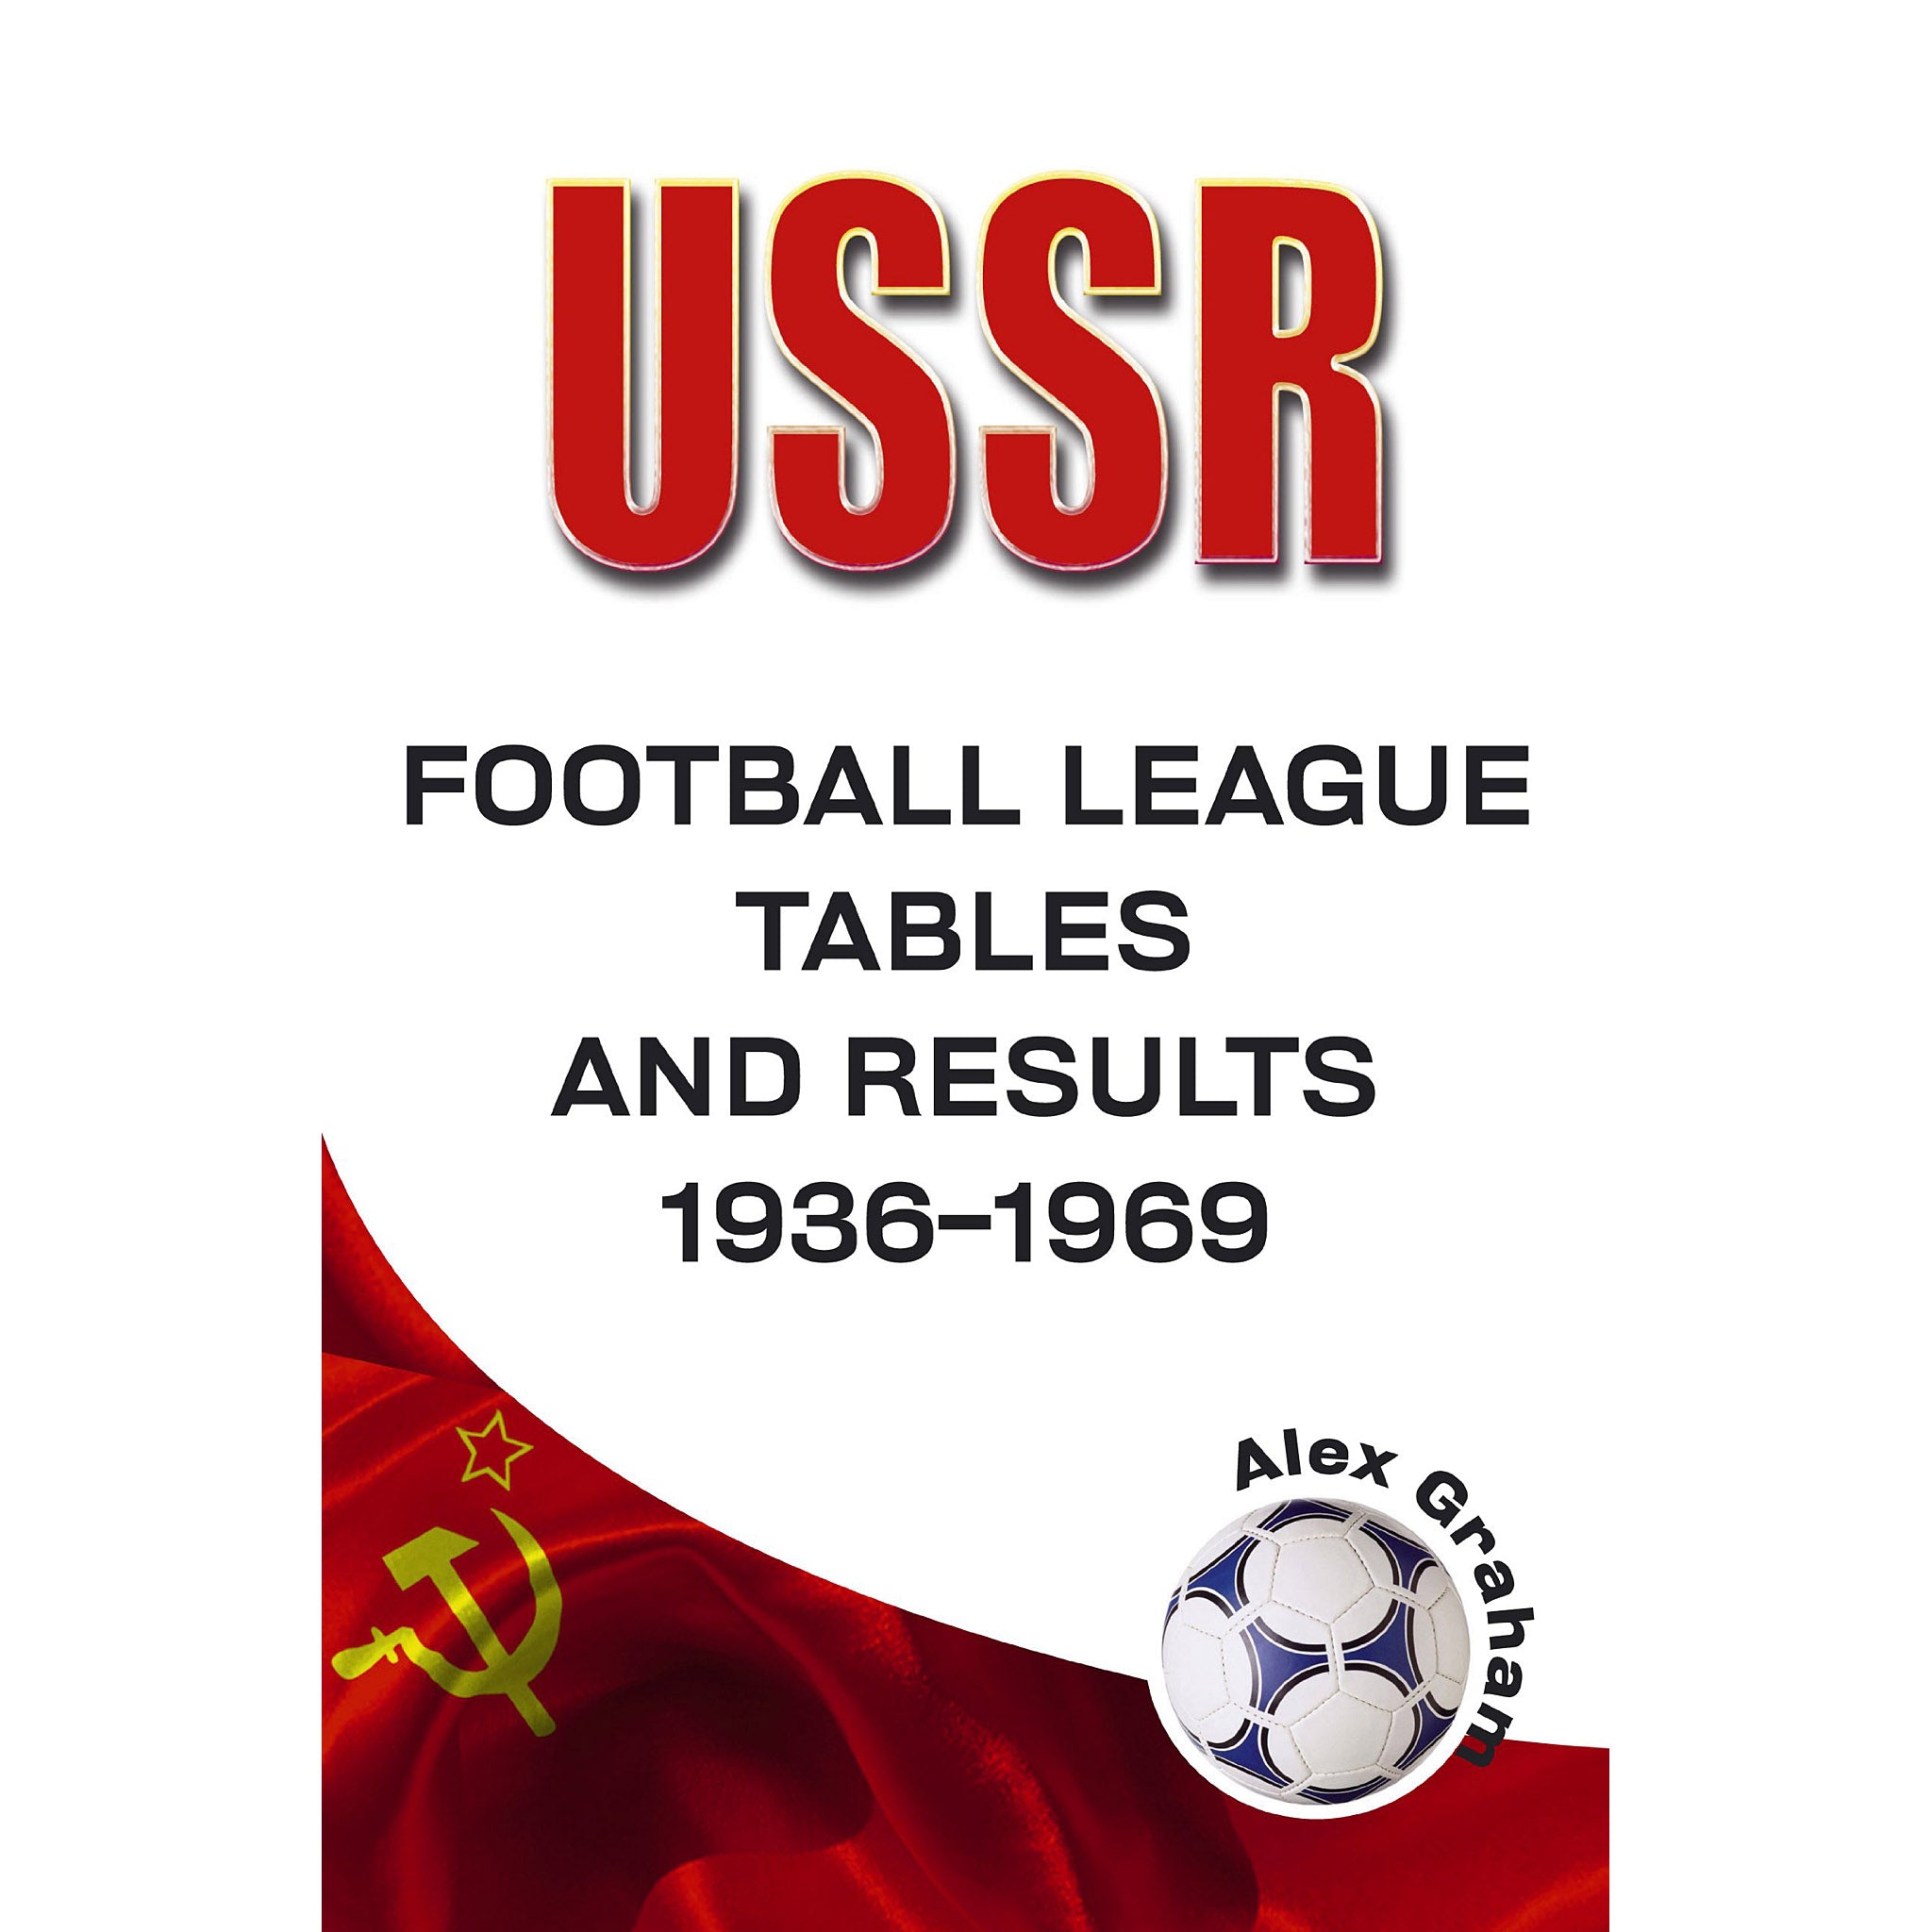 USSR – Football League Tables and Results 1936-1969